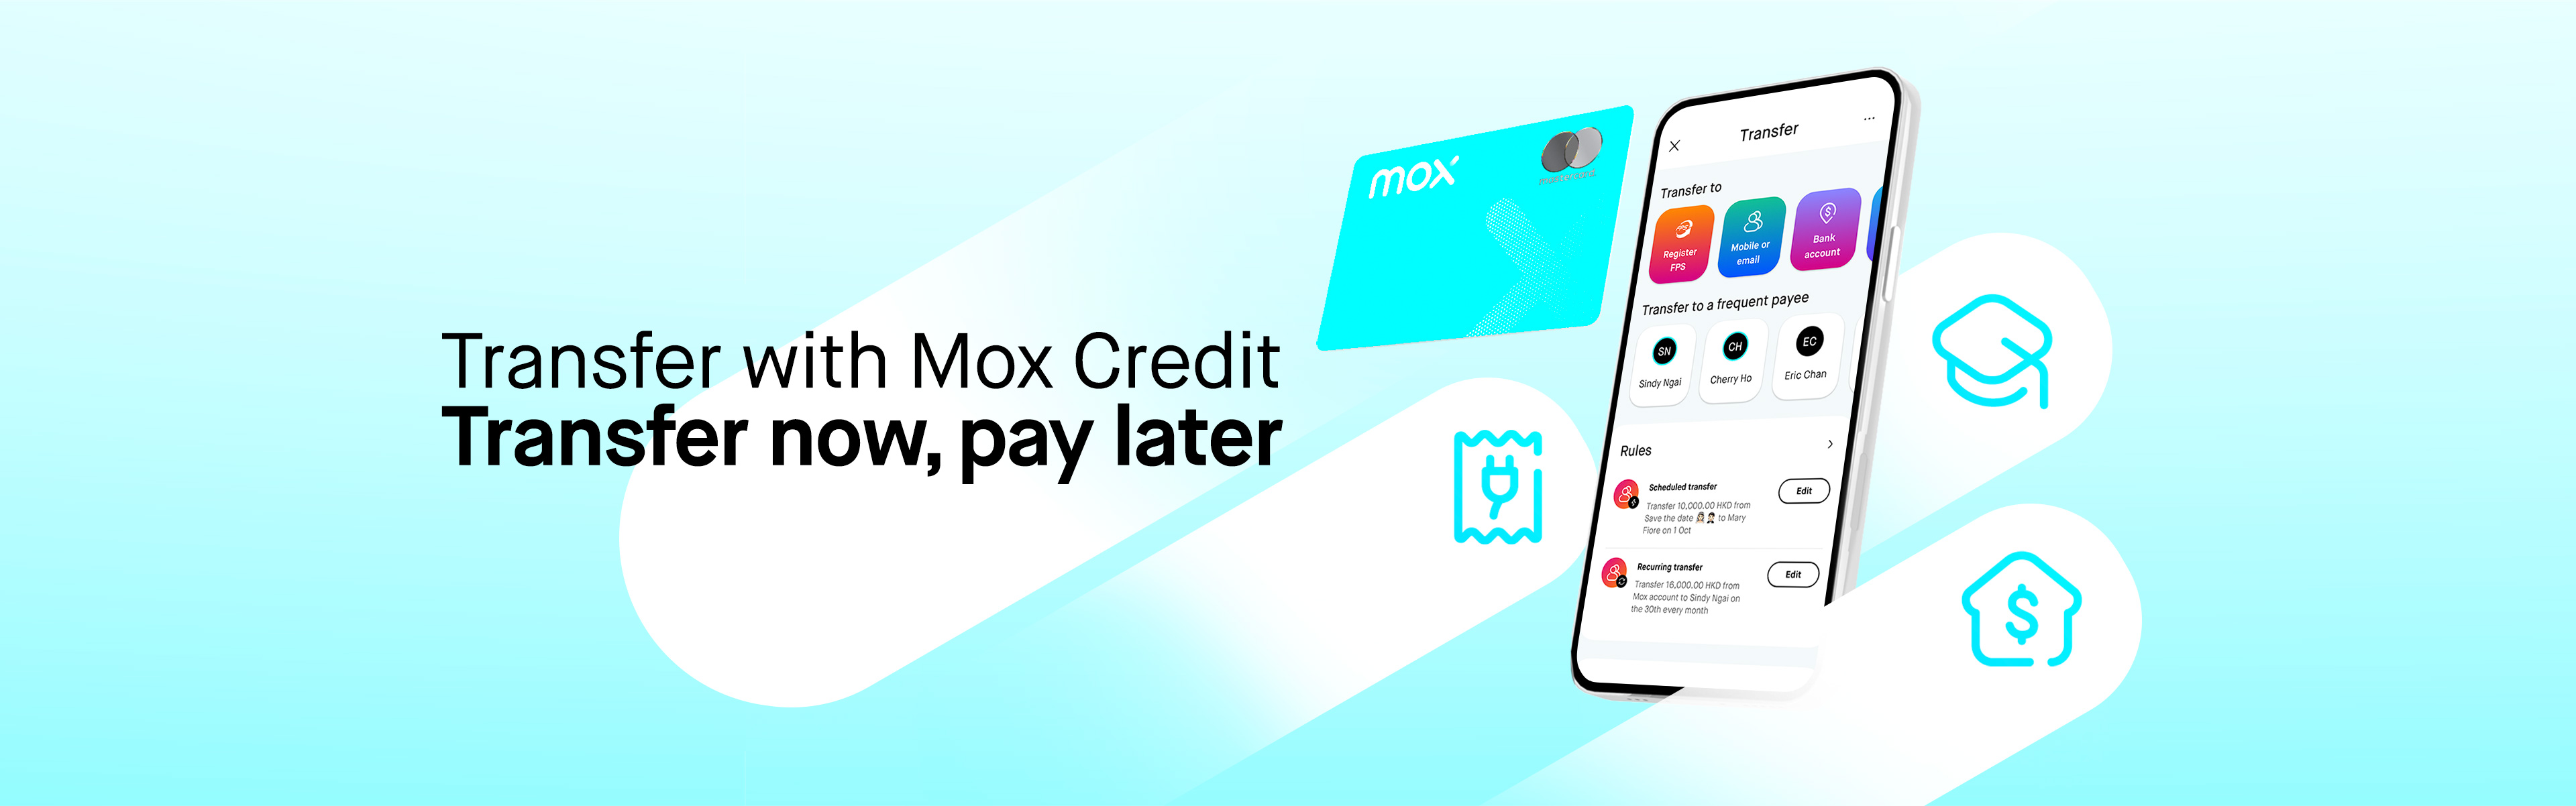 Mox Launches A New Service for Instant Money Transfers With Mox Credit 